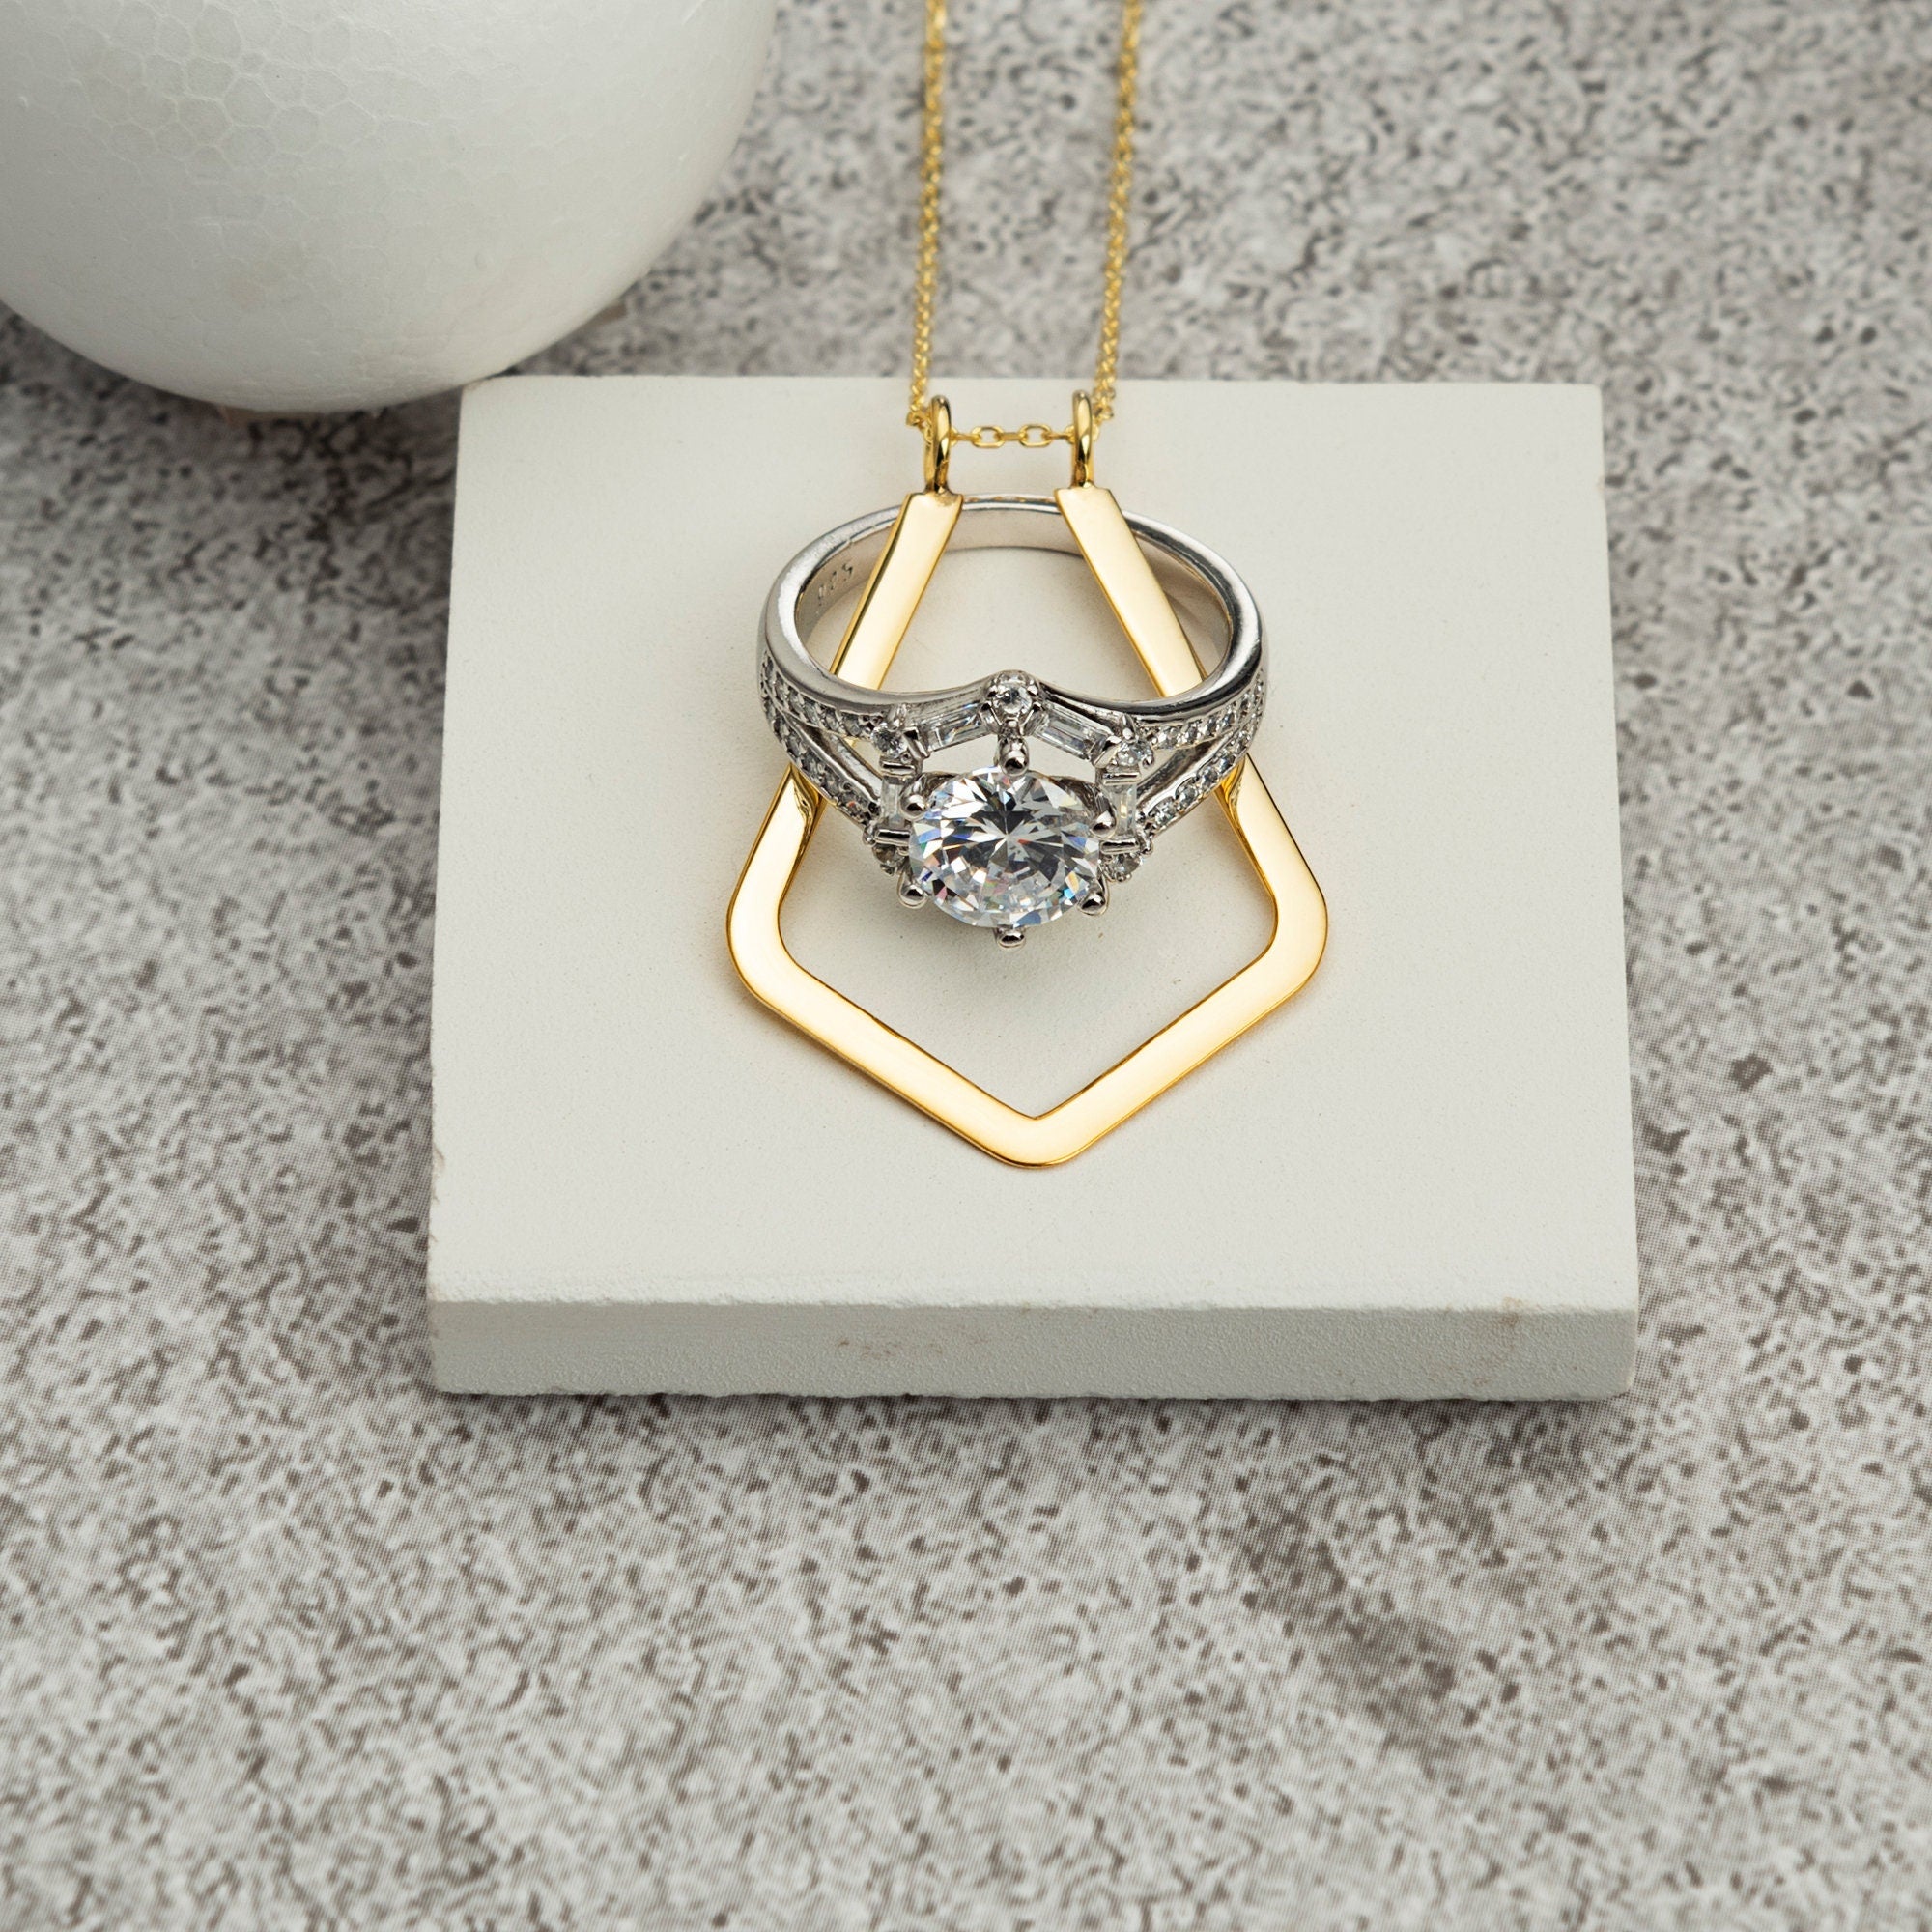 Ring Holder Necklace Amazon Mother's Day Gift Guide | Ring holder necklace,  Wedding ring necklaces, Jewelry